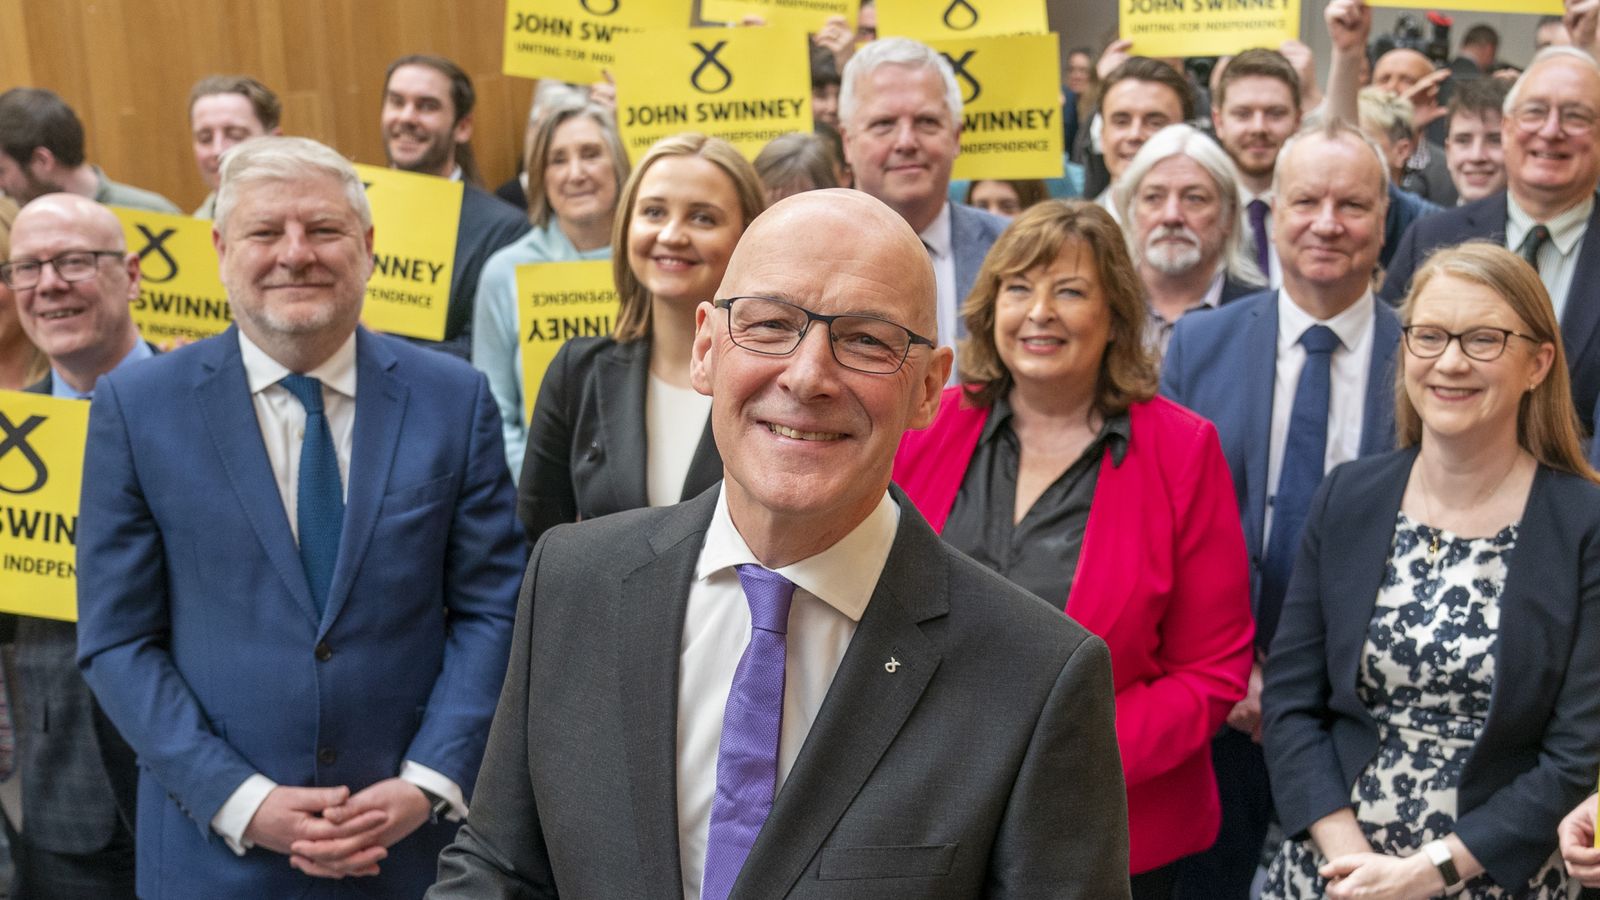 SNP leadership race: John Swinney new party leader and now set to become Scottish first minister